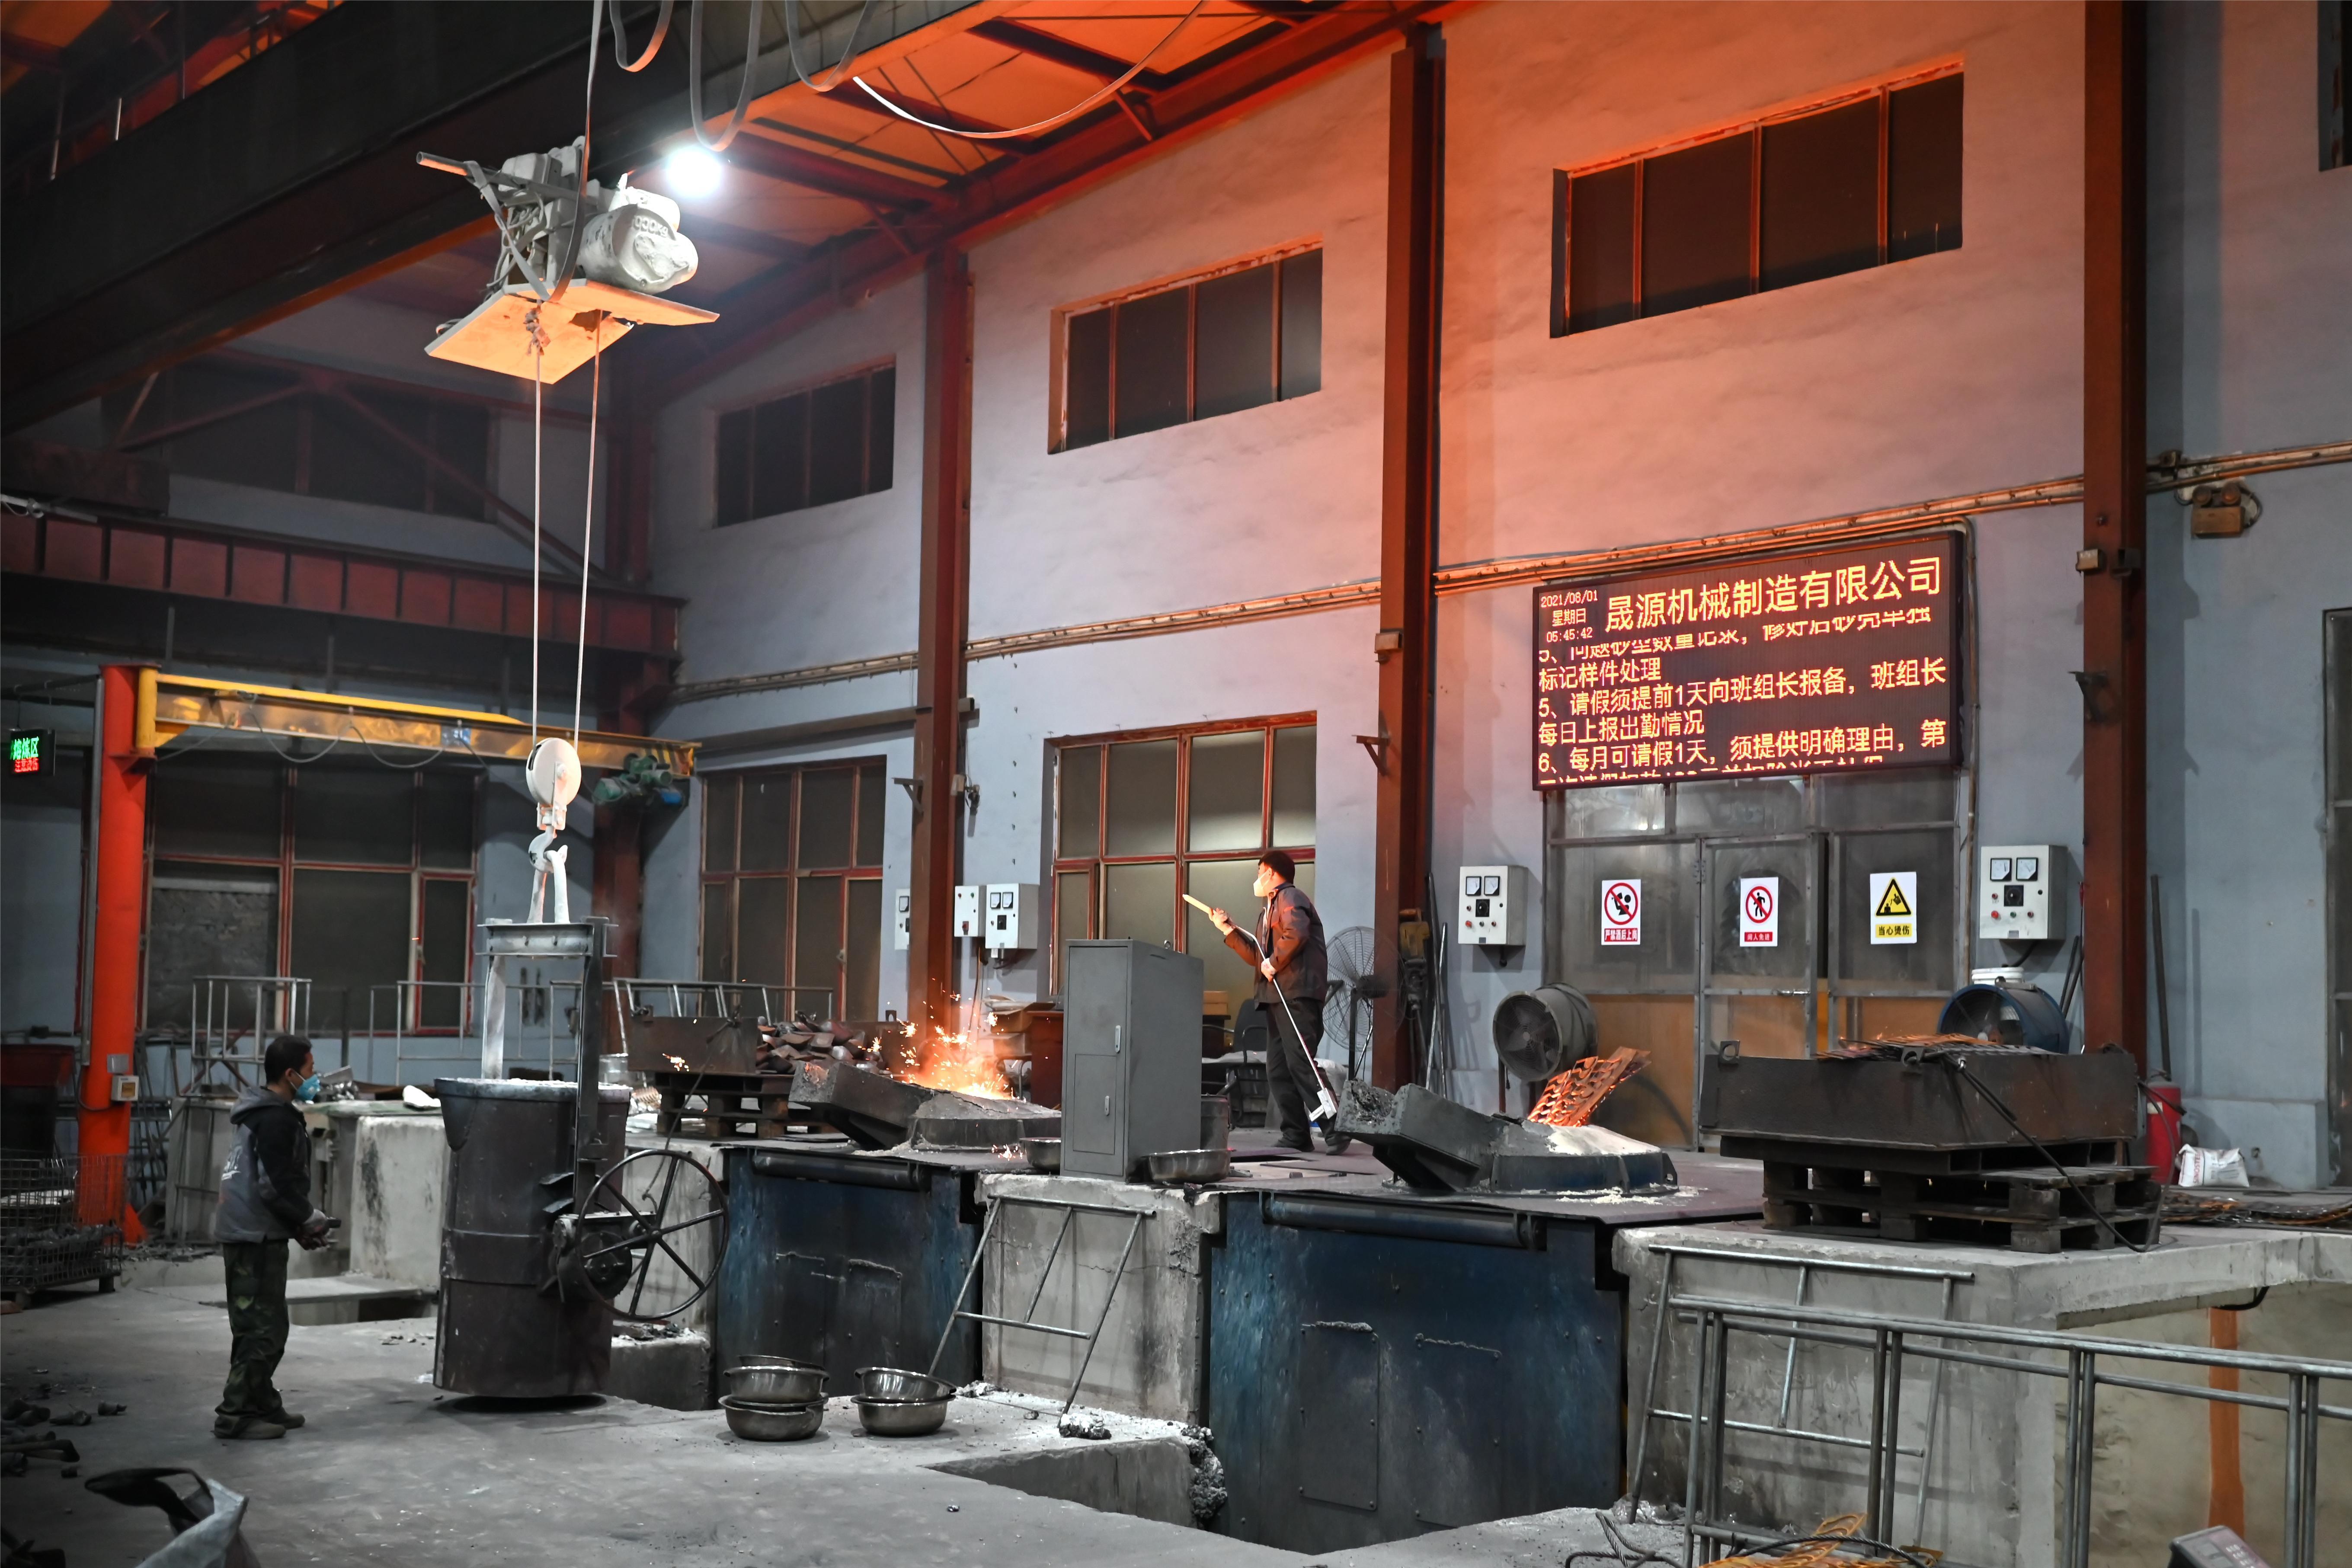 Medium-frequency induction furnace